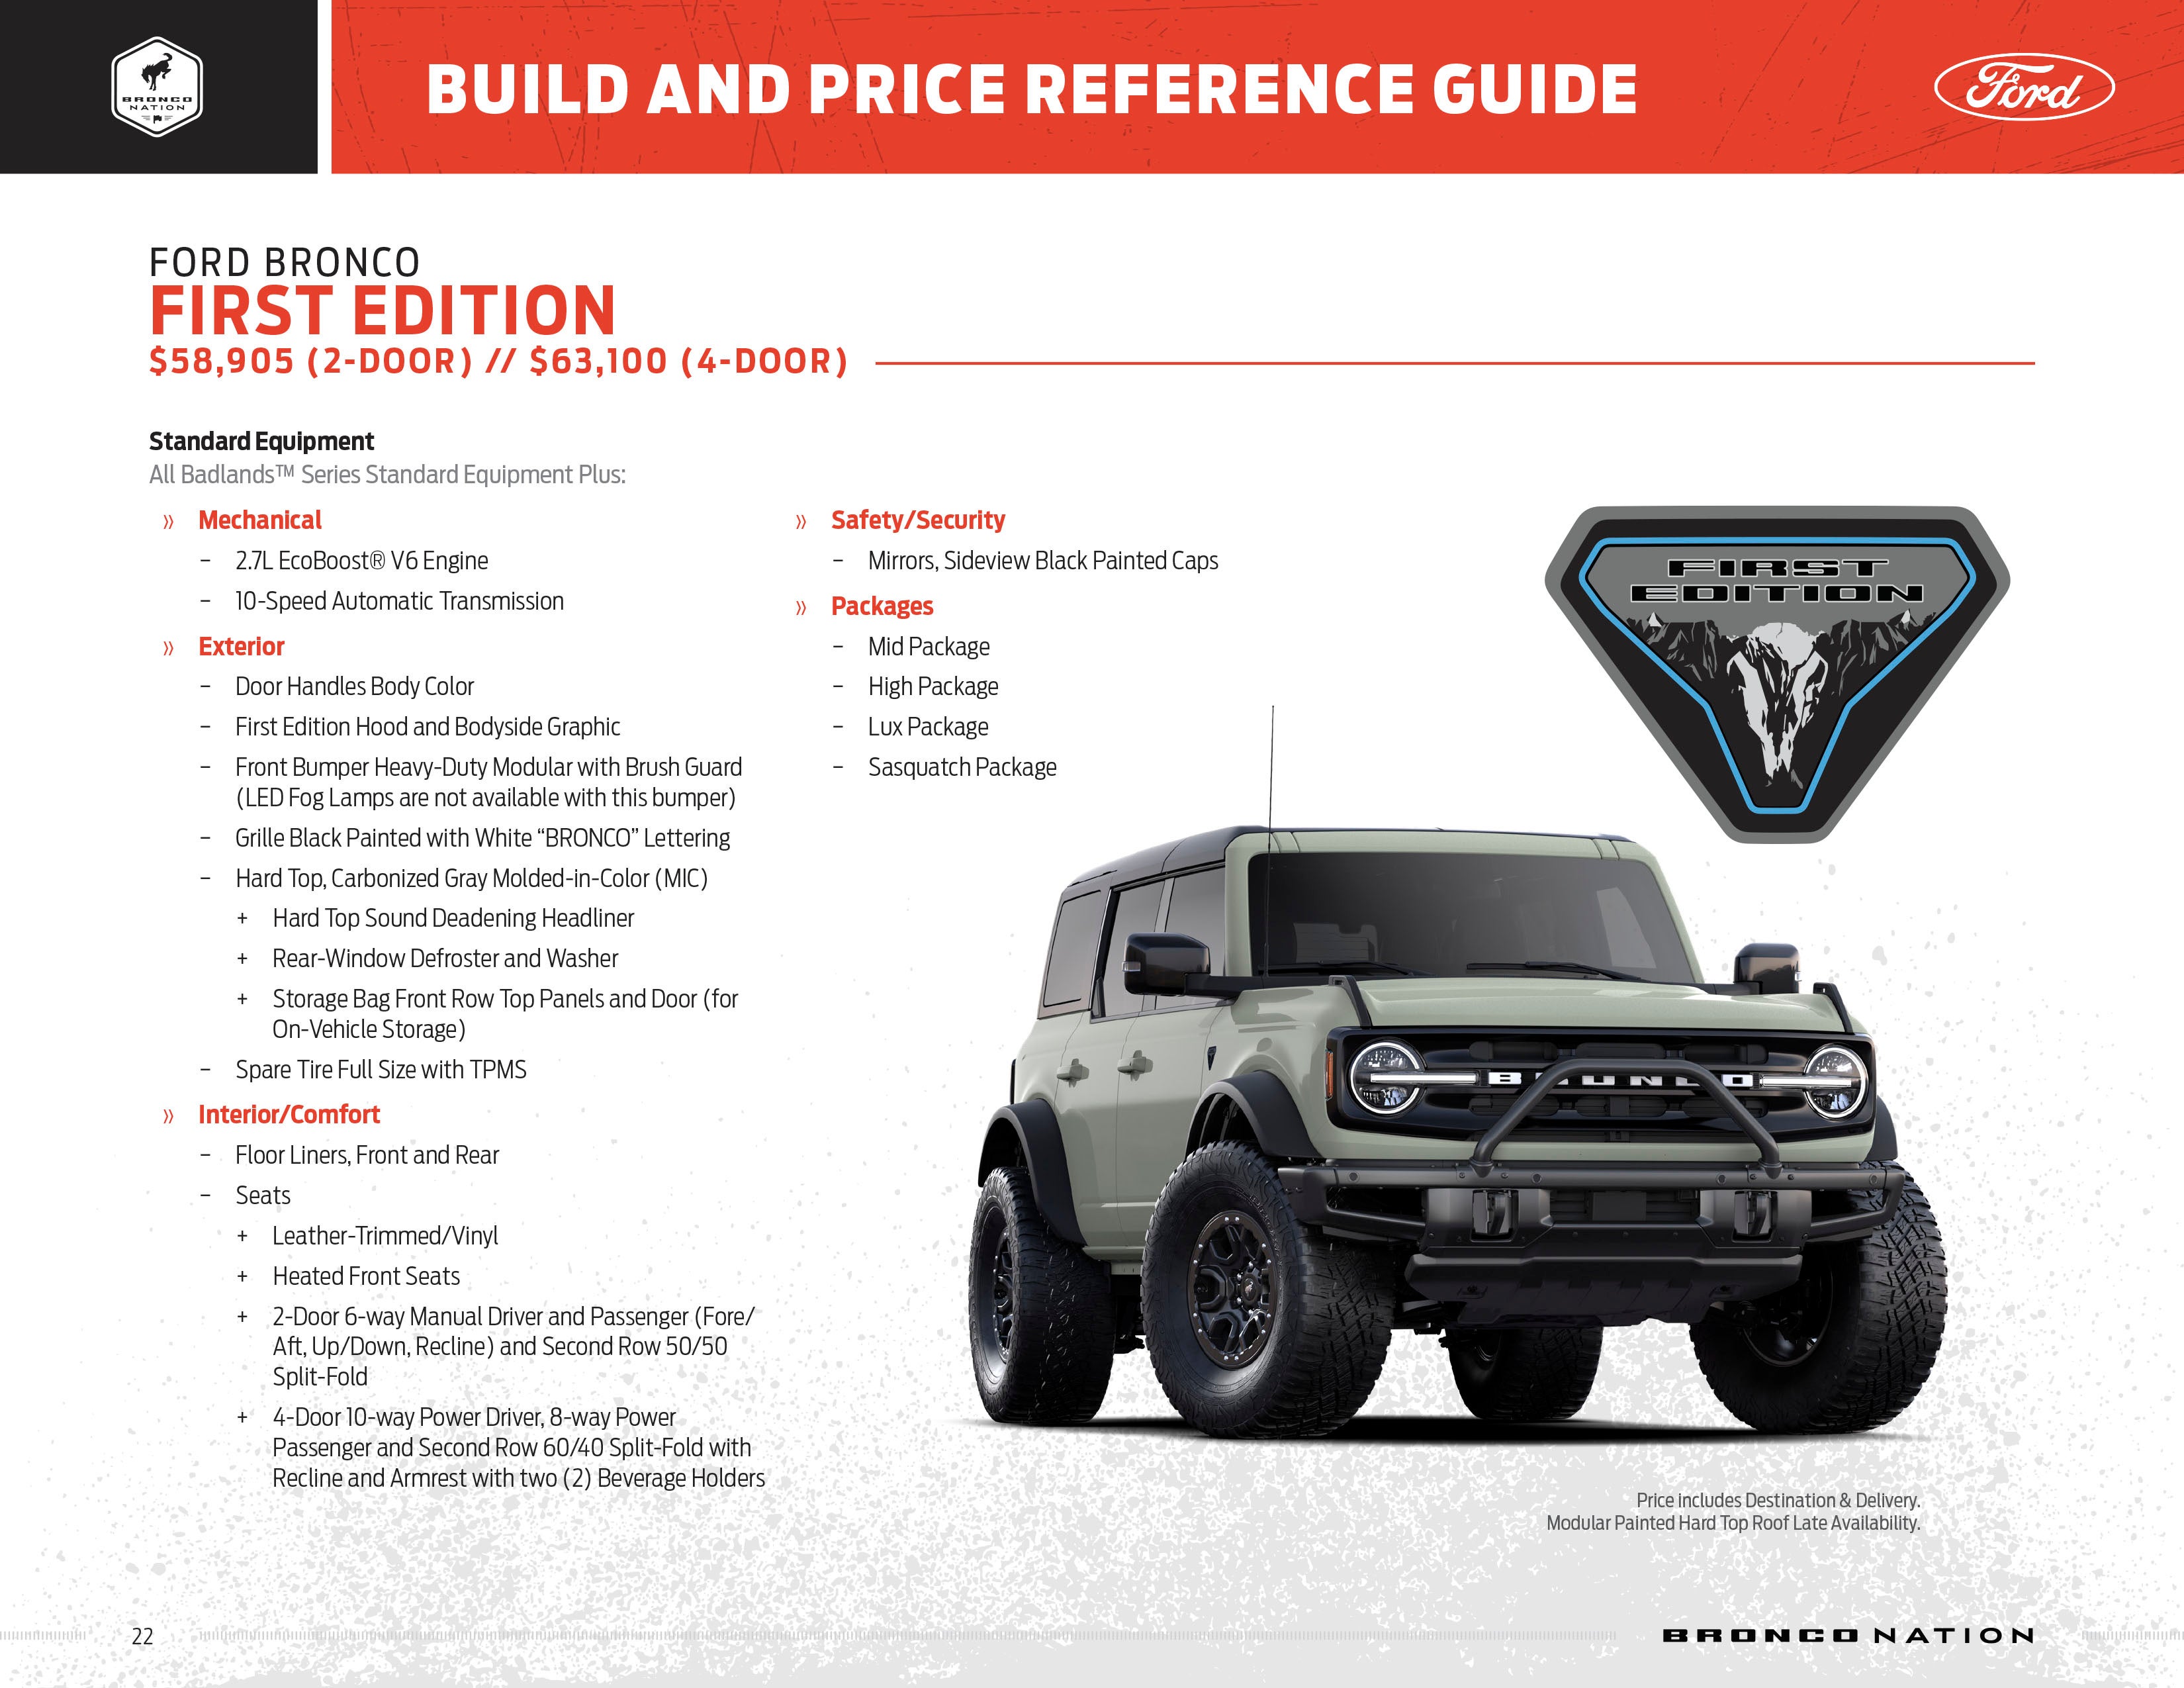 Bronco Build and Price Guide Page 22